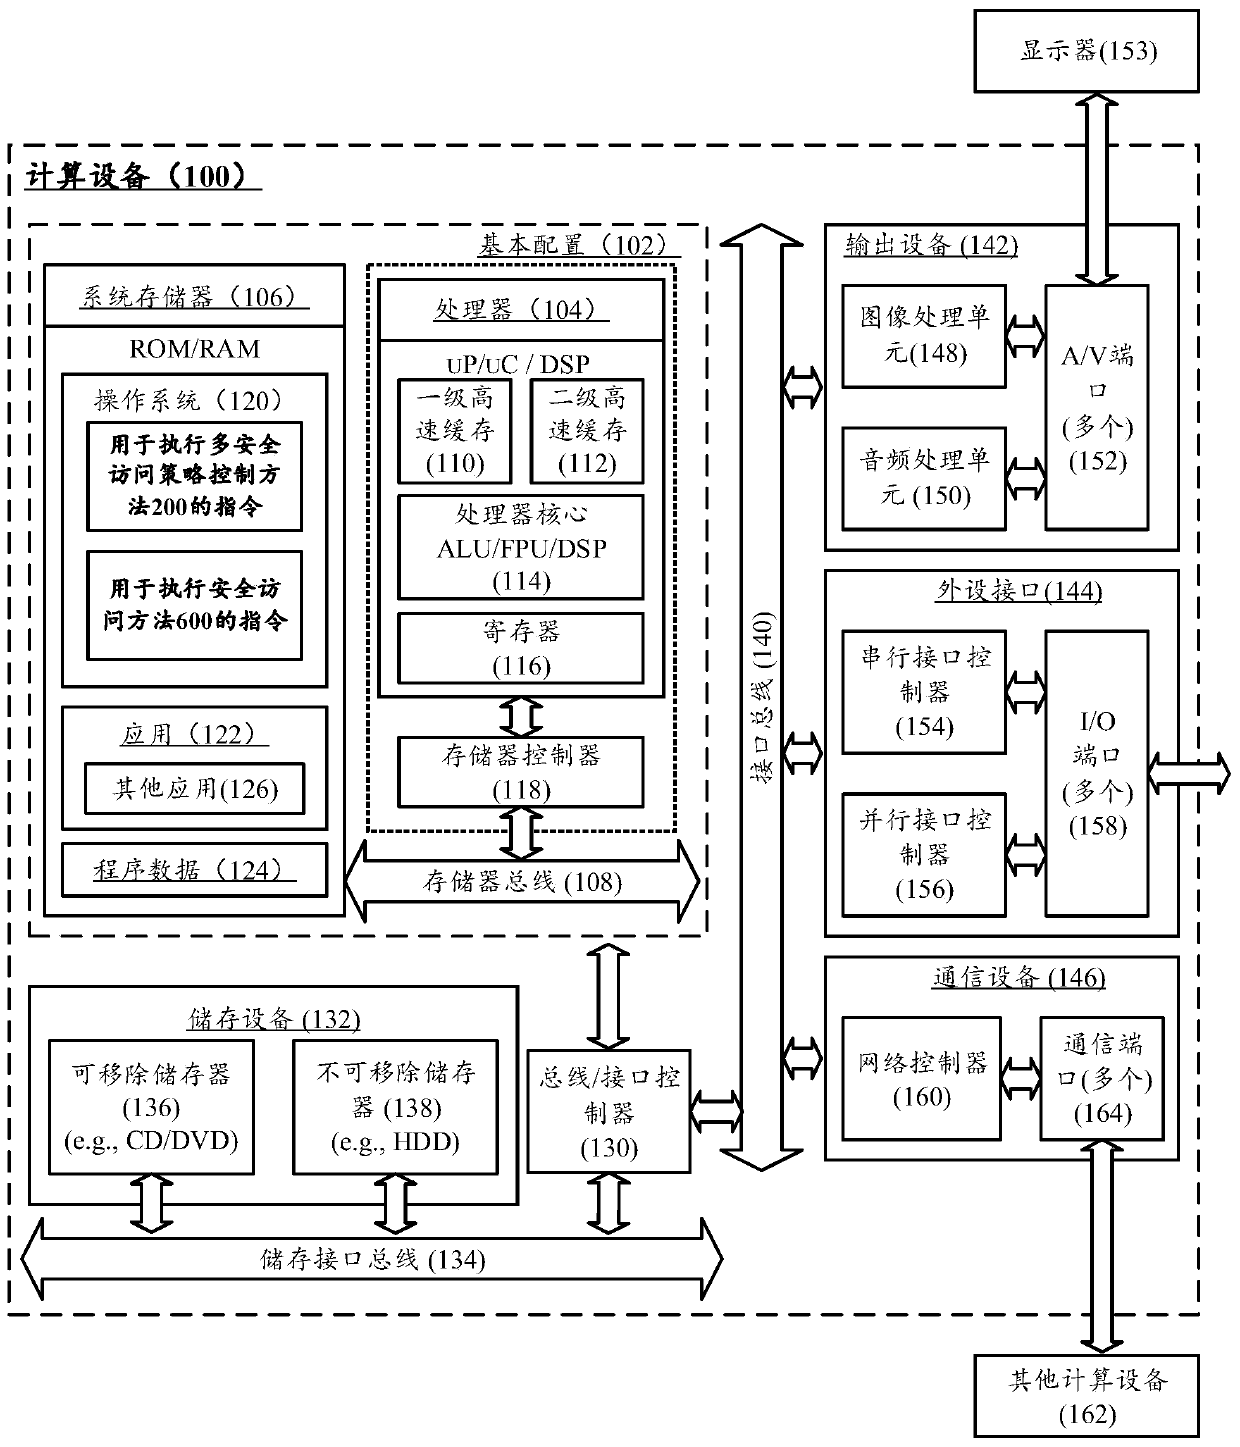 Multi-security access strategy control method and computing equipment